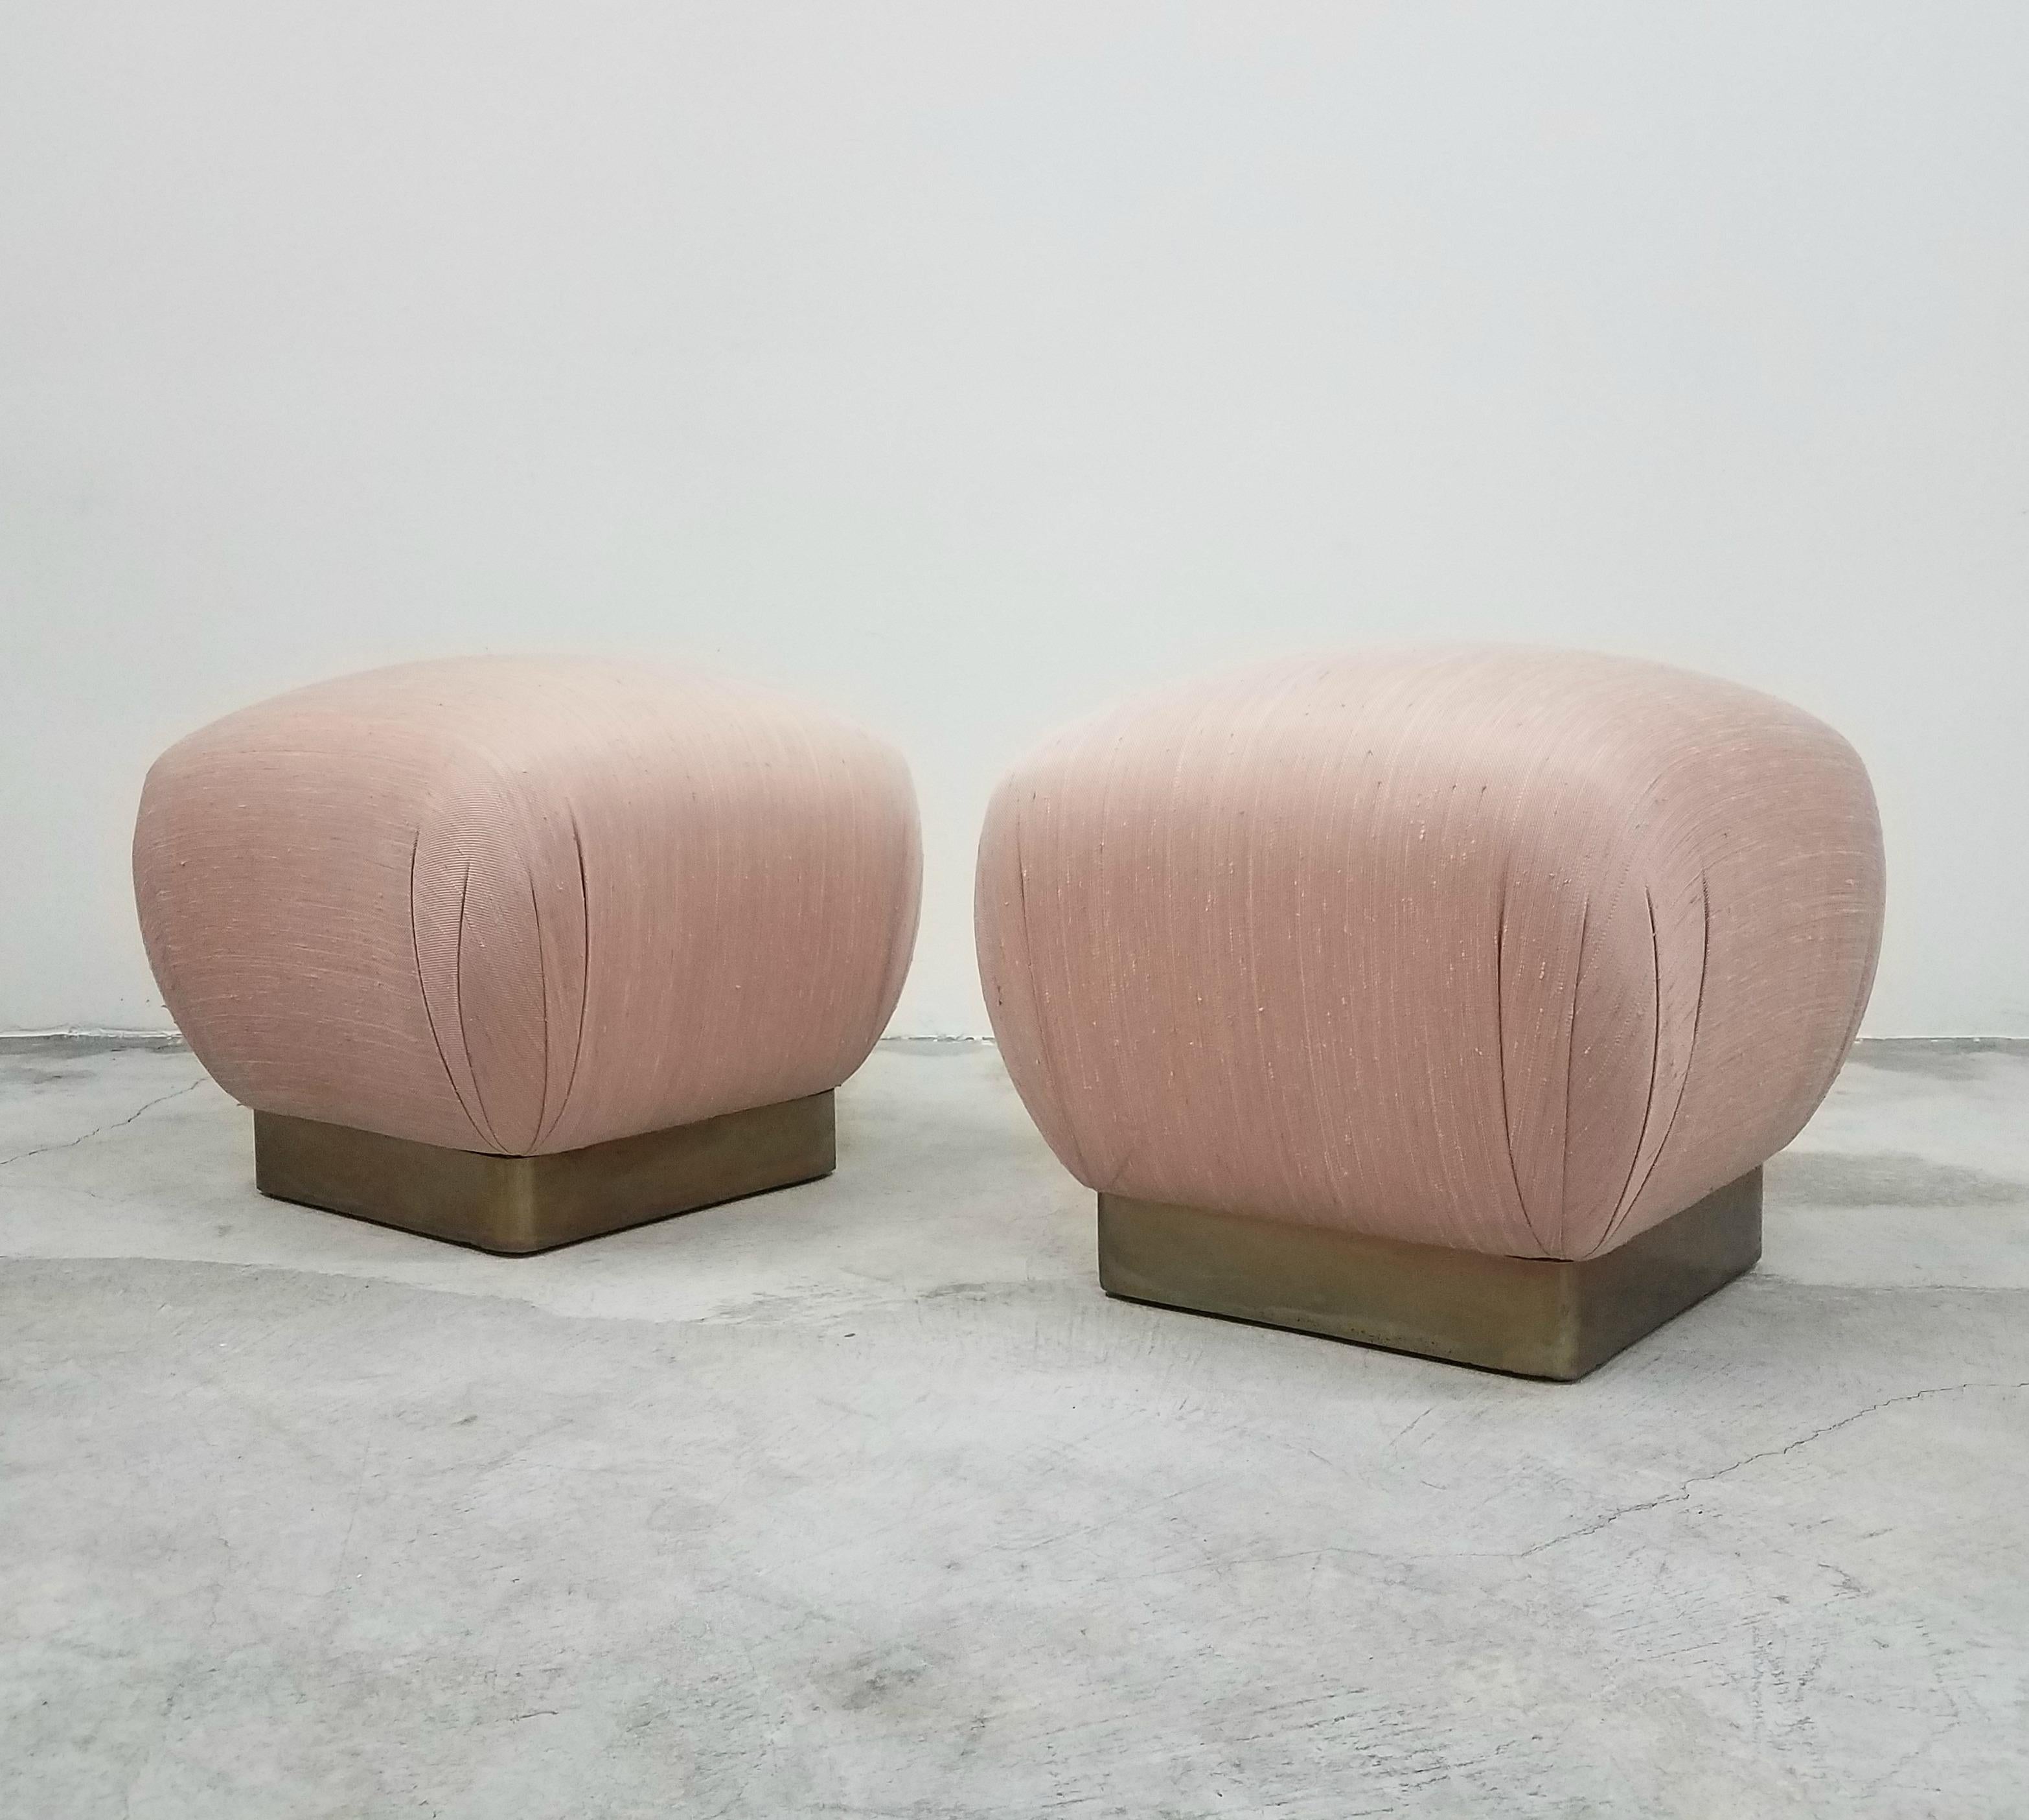 Gorgeous pair of Regency Style pouf ottomans. Pair has beautifully patinated original brass plinth bases. Great for added seating or decor. 

Original blush pink upholstery is in good, usable condition. Professional reupholstery available.